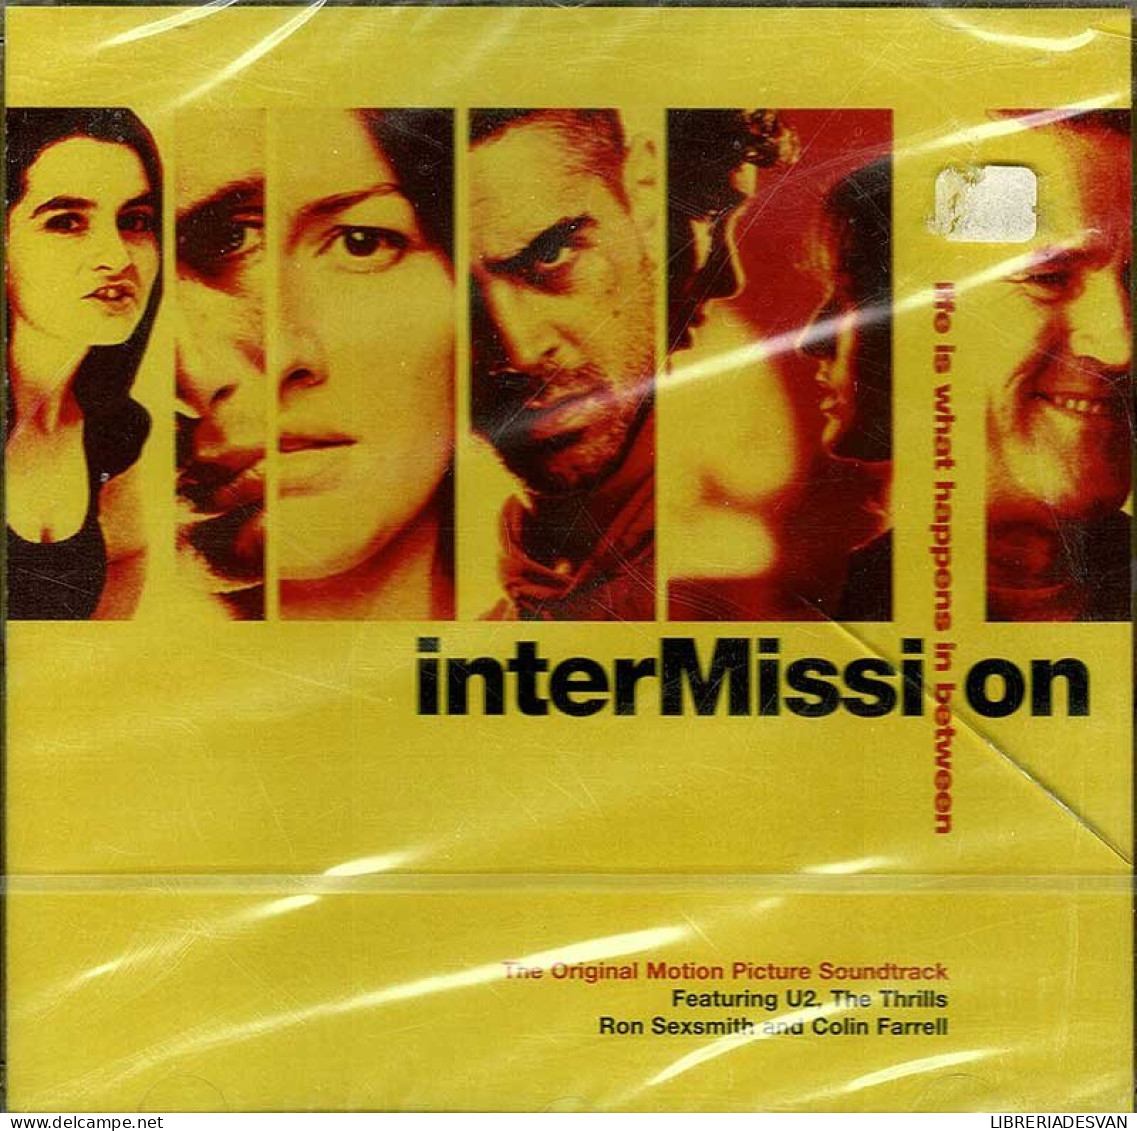 Intermission - Life Is What Happens In Between (The Original Motion Picture Soundtrack). CD - Soundtracks, Film Music